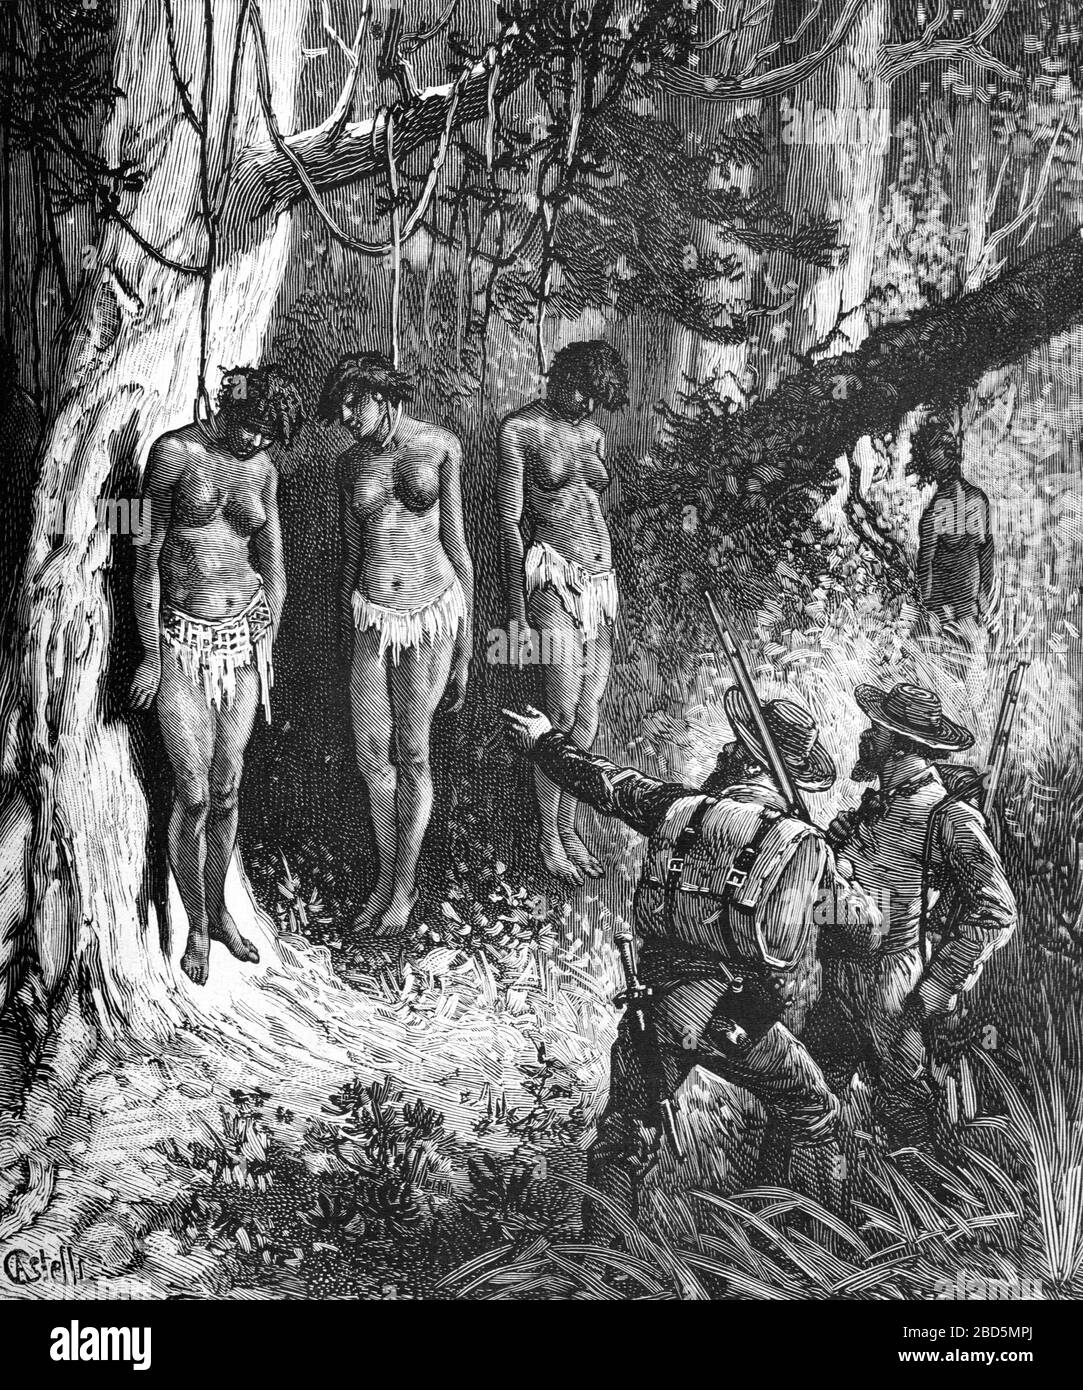 Ritual Suicide by Hanging of Widows of Deceased Kanak Chief in New Caledonia. Vintage or Old Illustration or Engraving 1882 Stock Photo